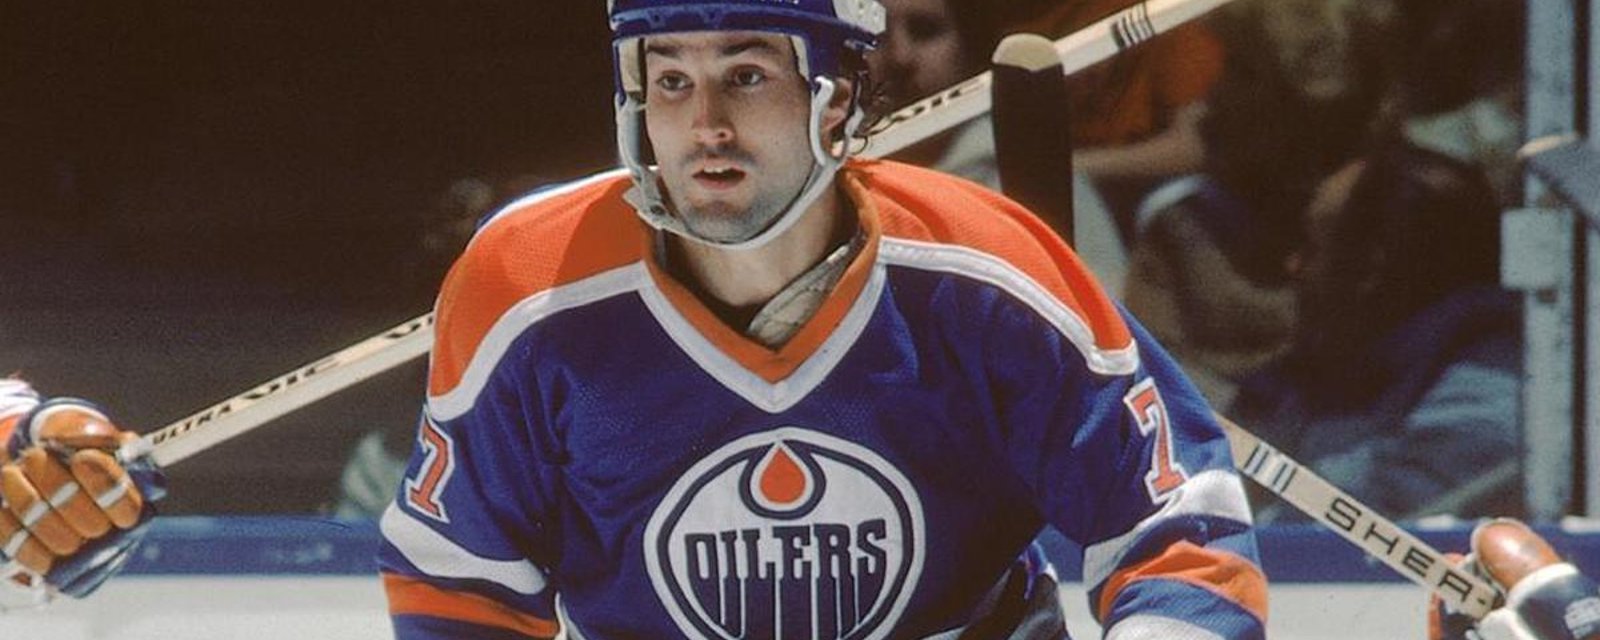 Breaking: Important update on Paul Coffey's return with the Oilers!